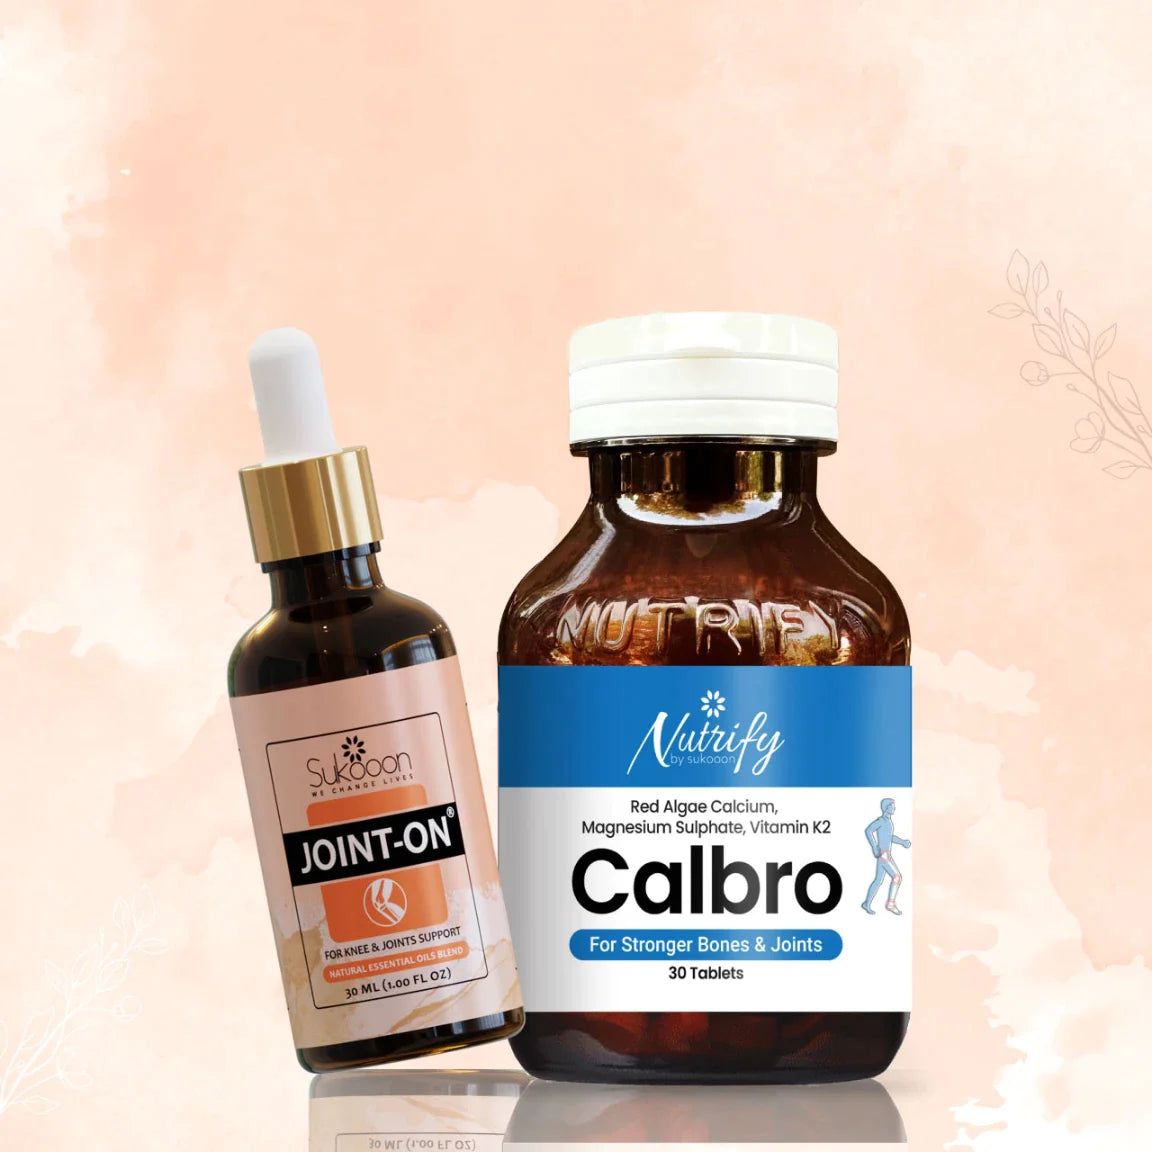 Joint-On (30ML) Essential Oil + Calbro Tablets